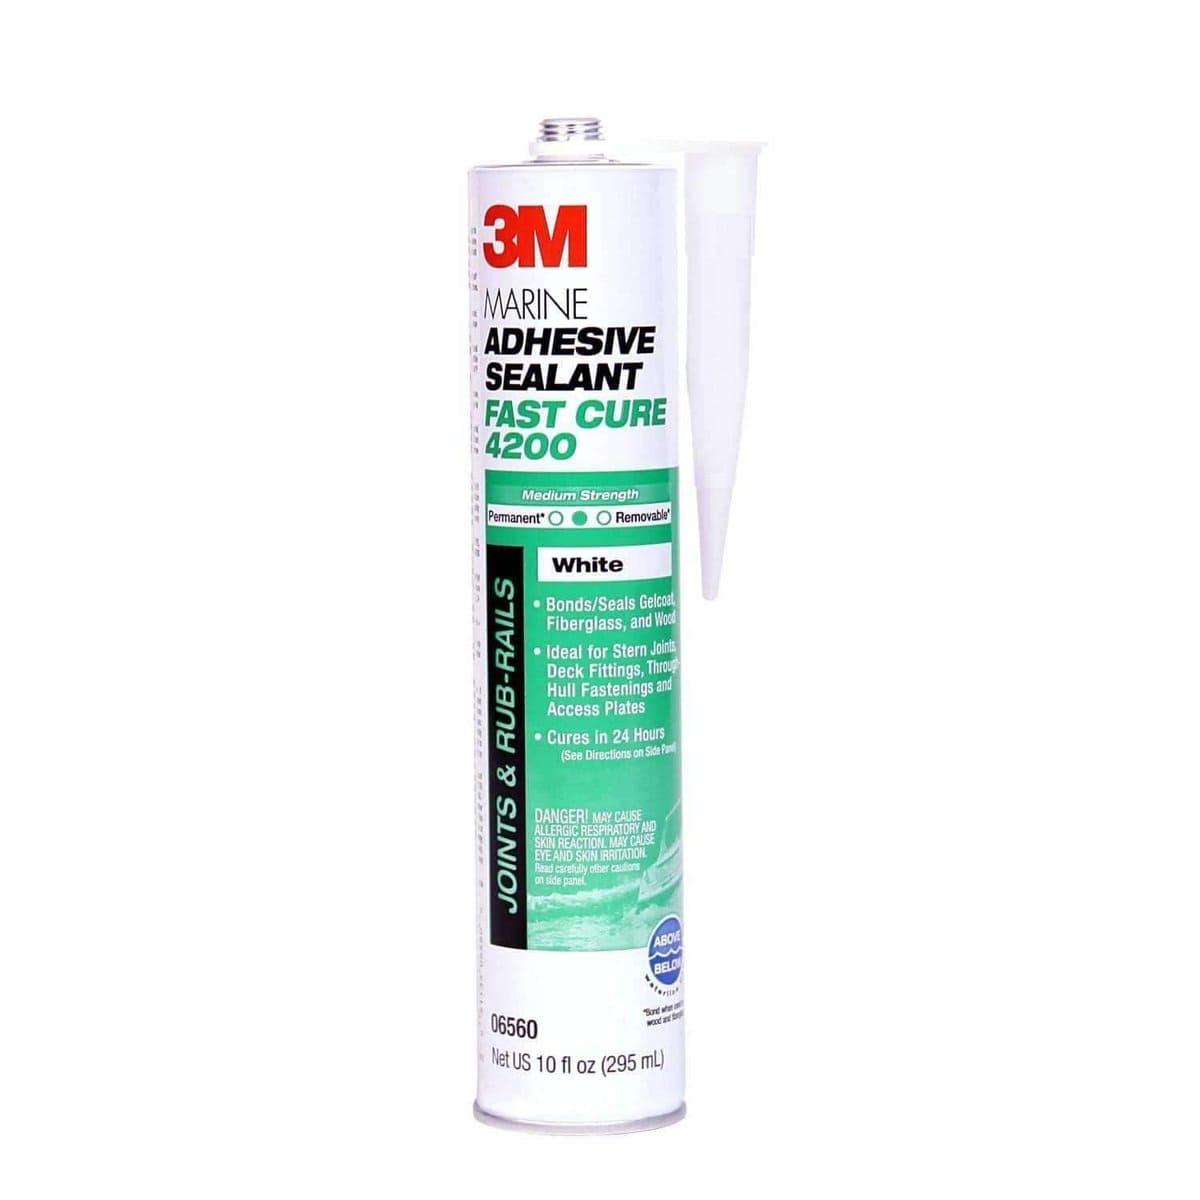 3M Marine Qualifies for Free Shipping 3M Marine 4200 Fast Cure Sealant #06560